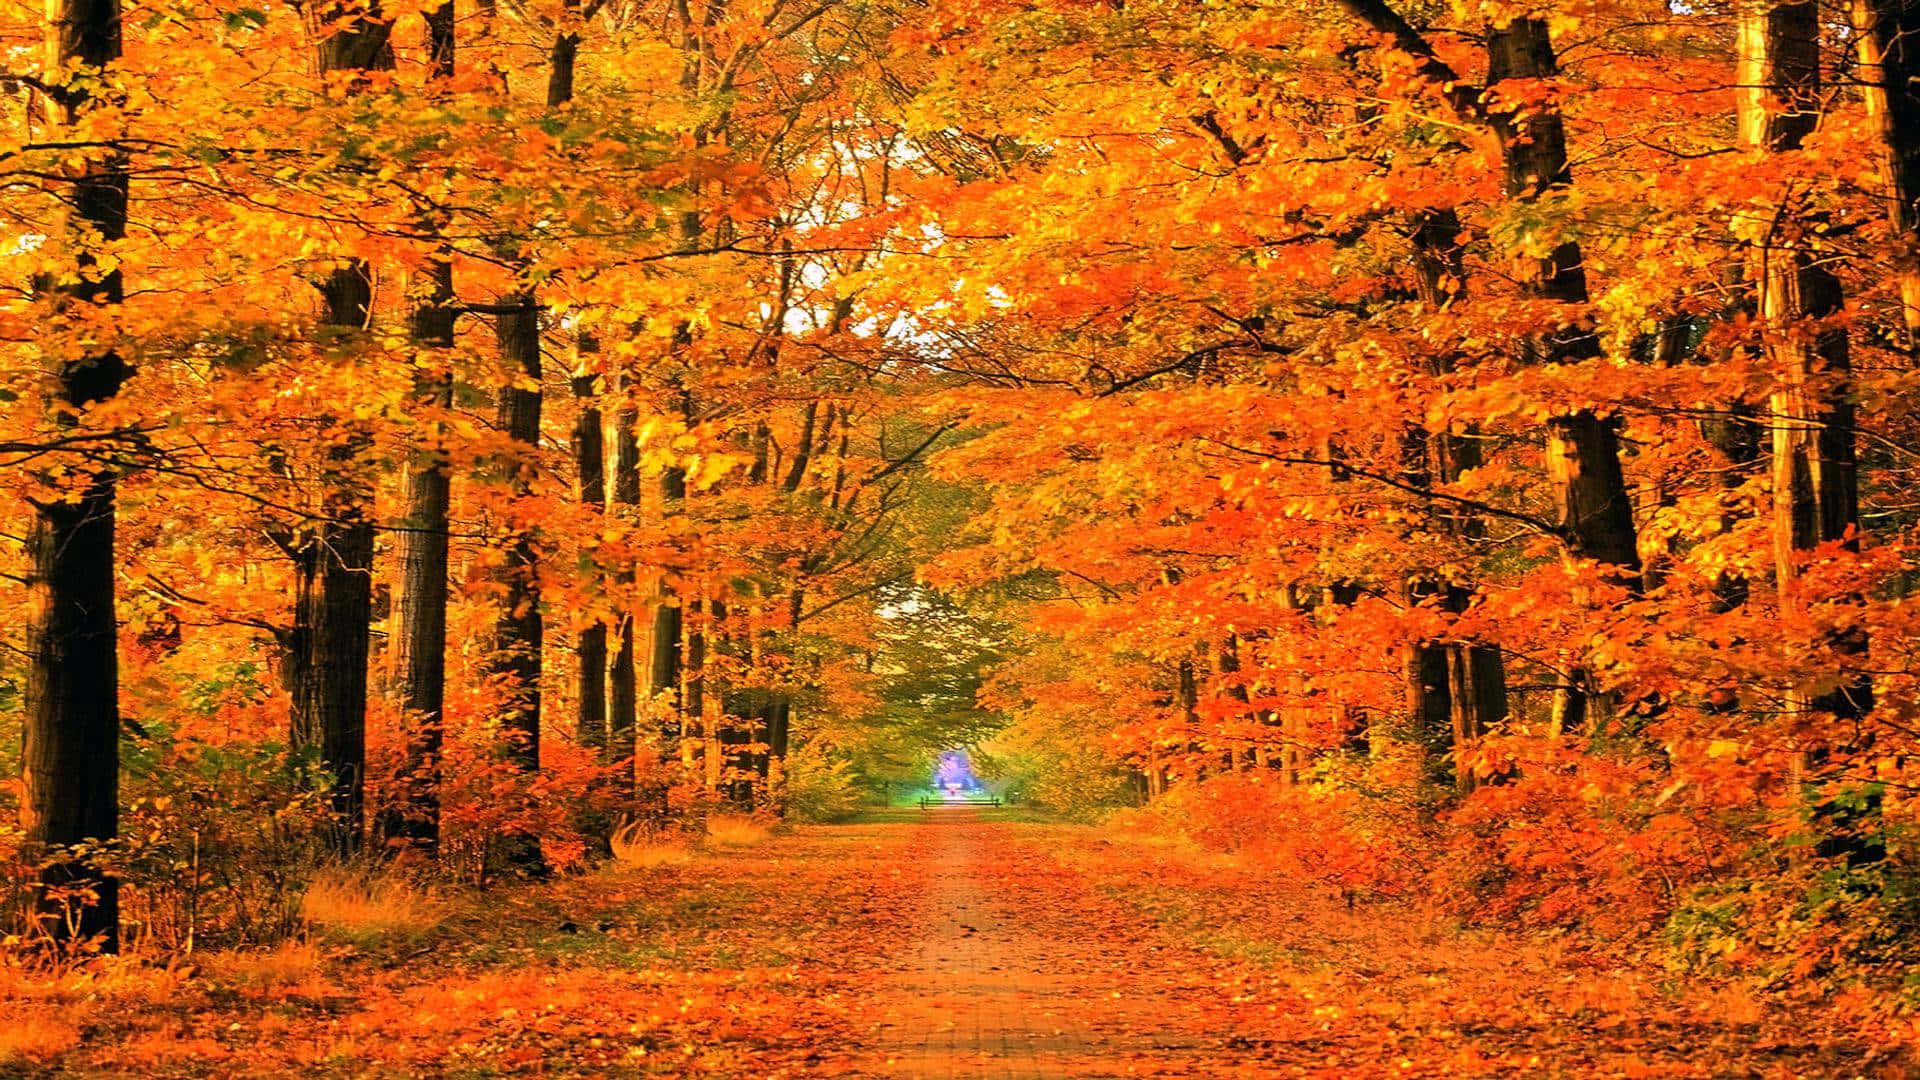 Enjoy the colors of Fall with this beautiful desktop background